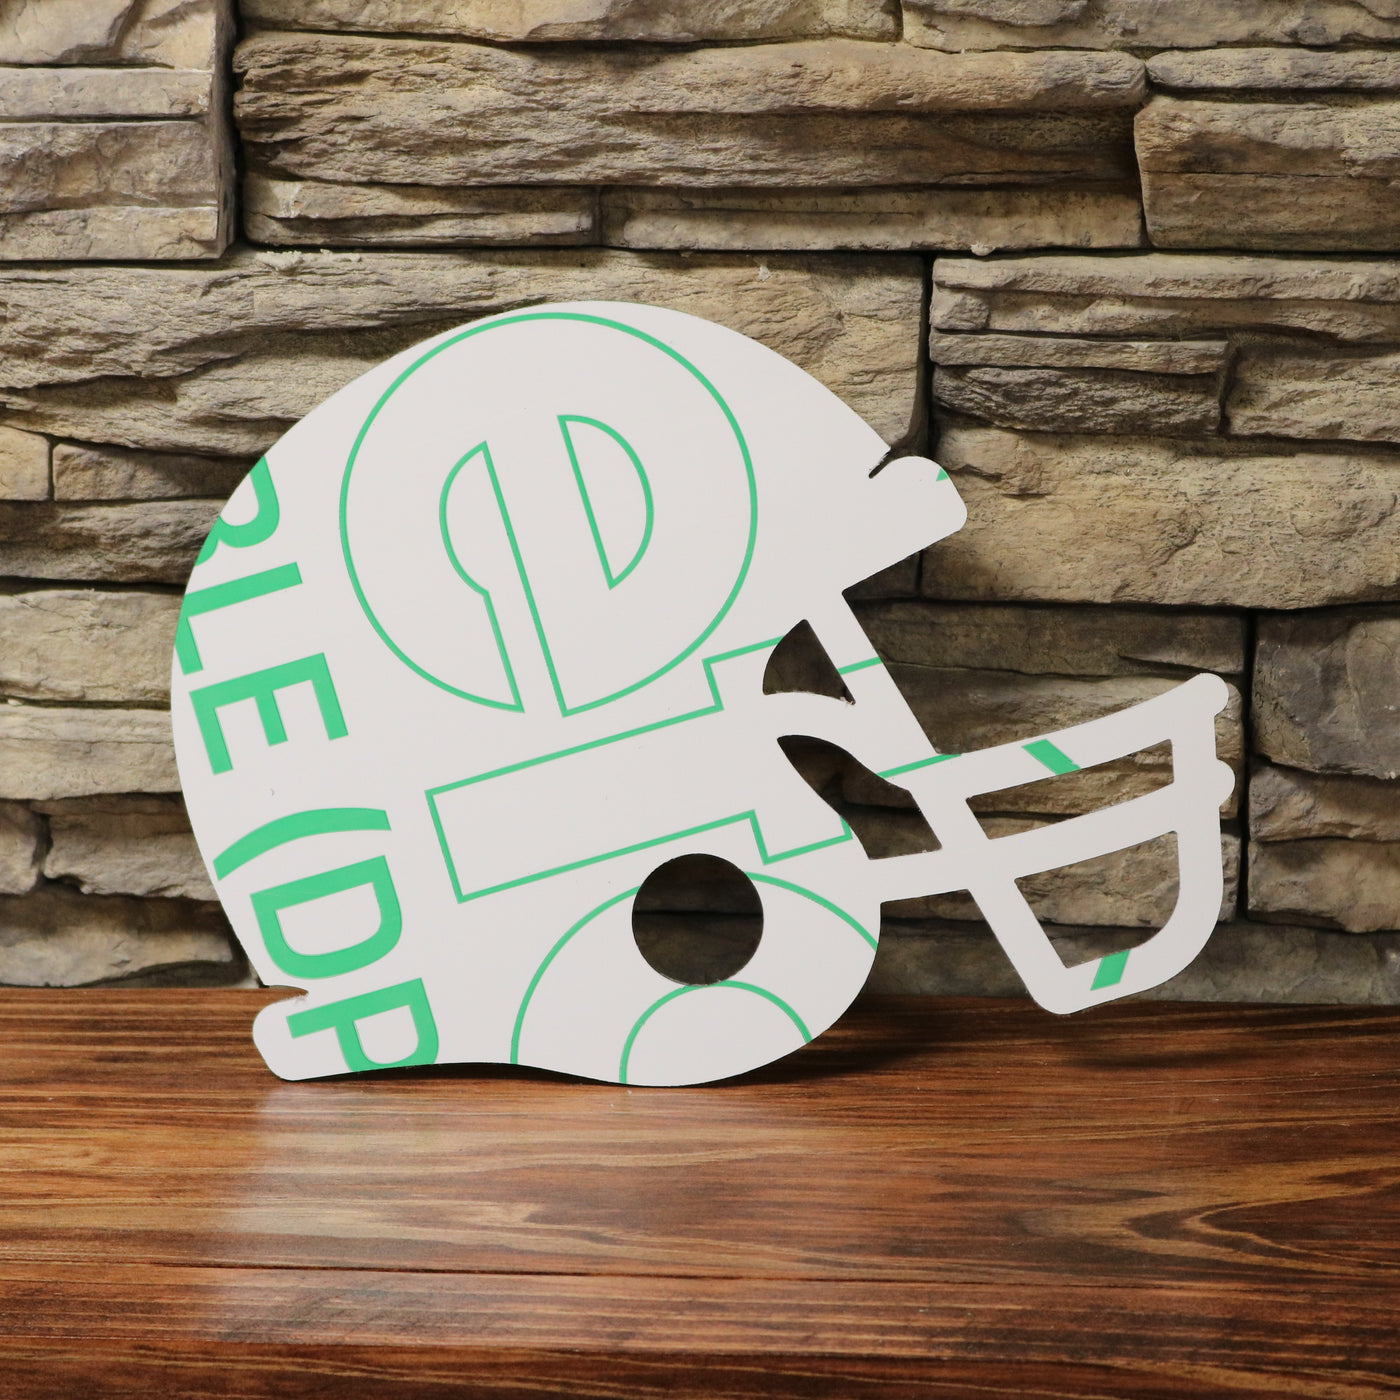 Football Helmet SVG Bundle with Customizable Aluminum Football Helmet Sign Blank with SVG Vinyl Cut File Included - Made in the USA for DIY, Crafters, Sign Making Bundle